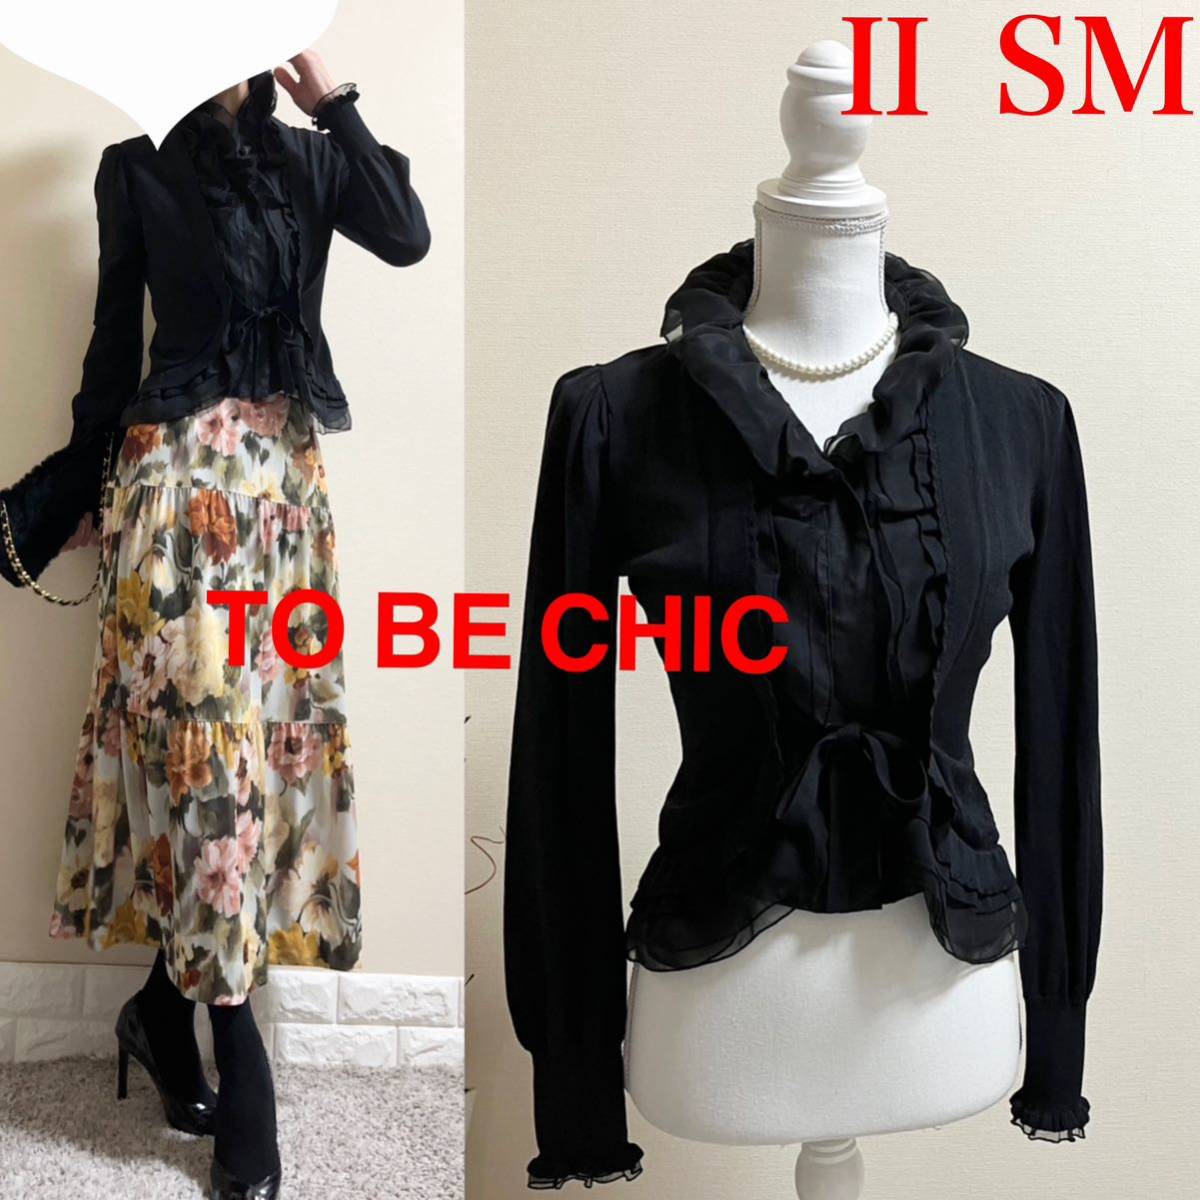 to be chic ブラウス　カーディガン　トップス　上質　黒　Ⅱ SM 通年　TO BE CHIC 三陽商会